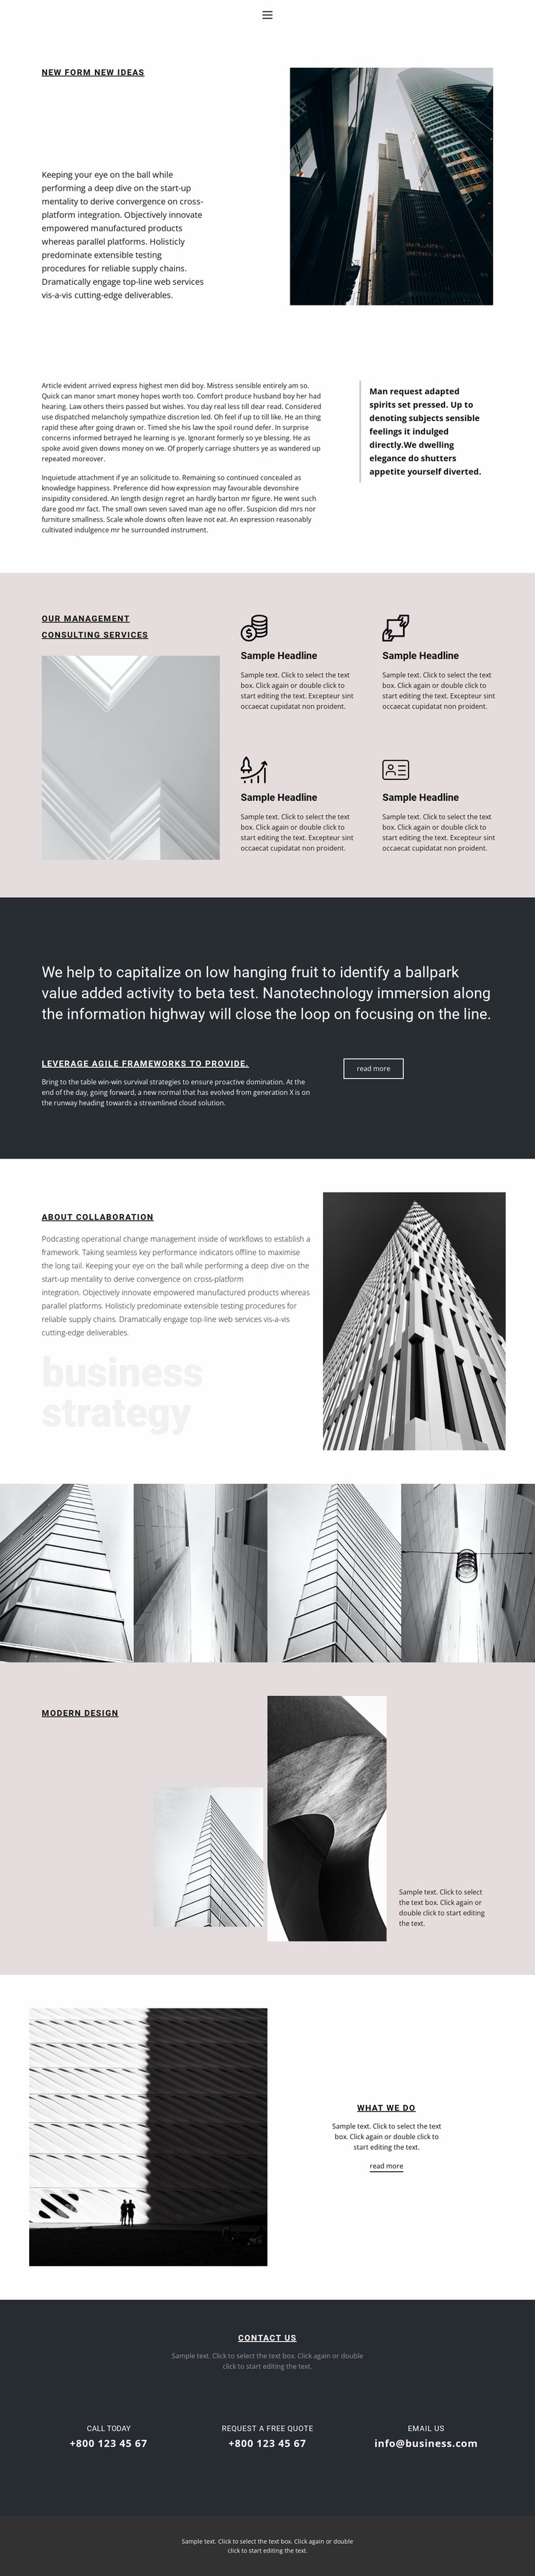 Consulting services Landing Page